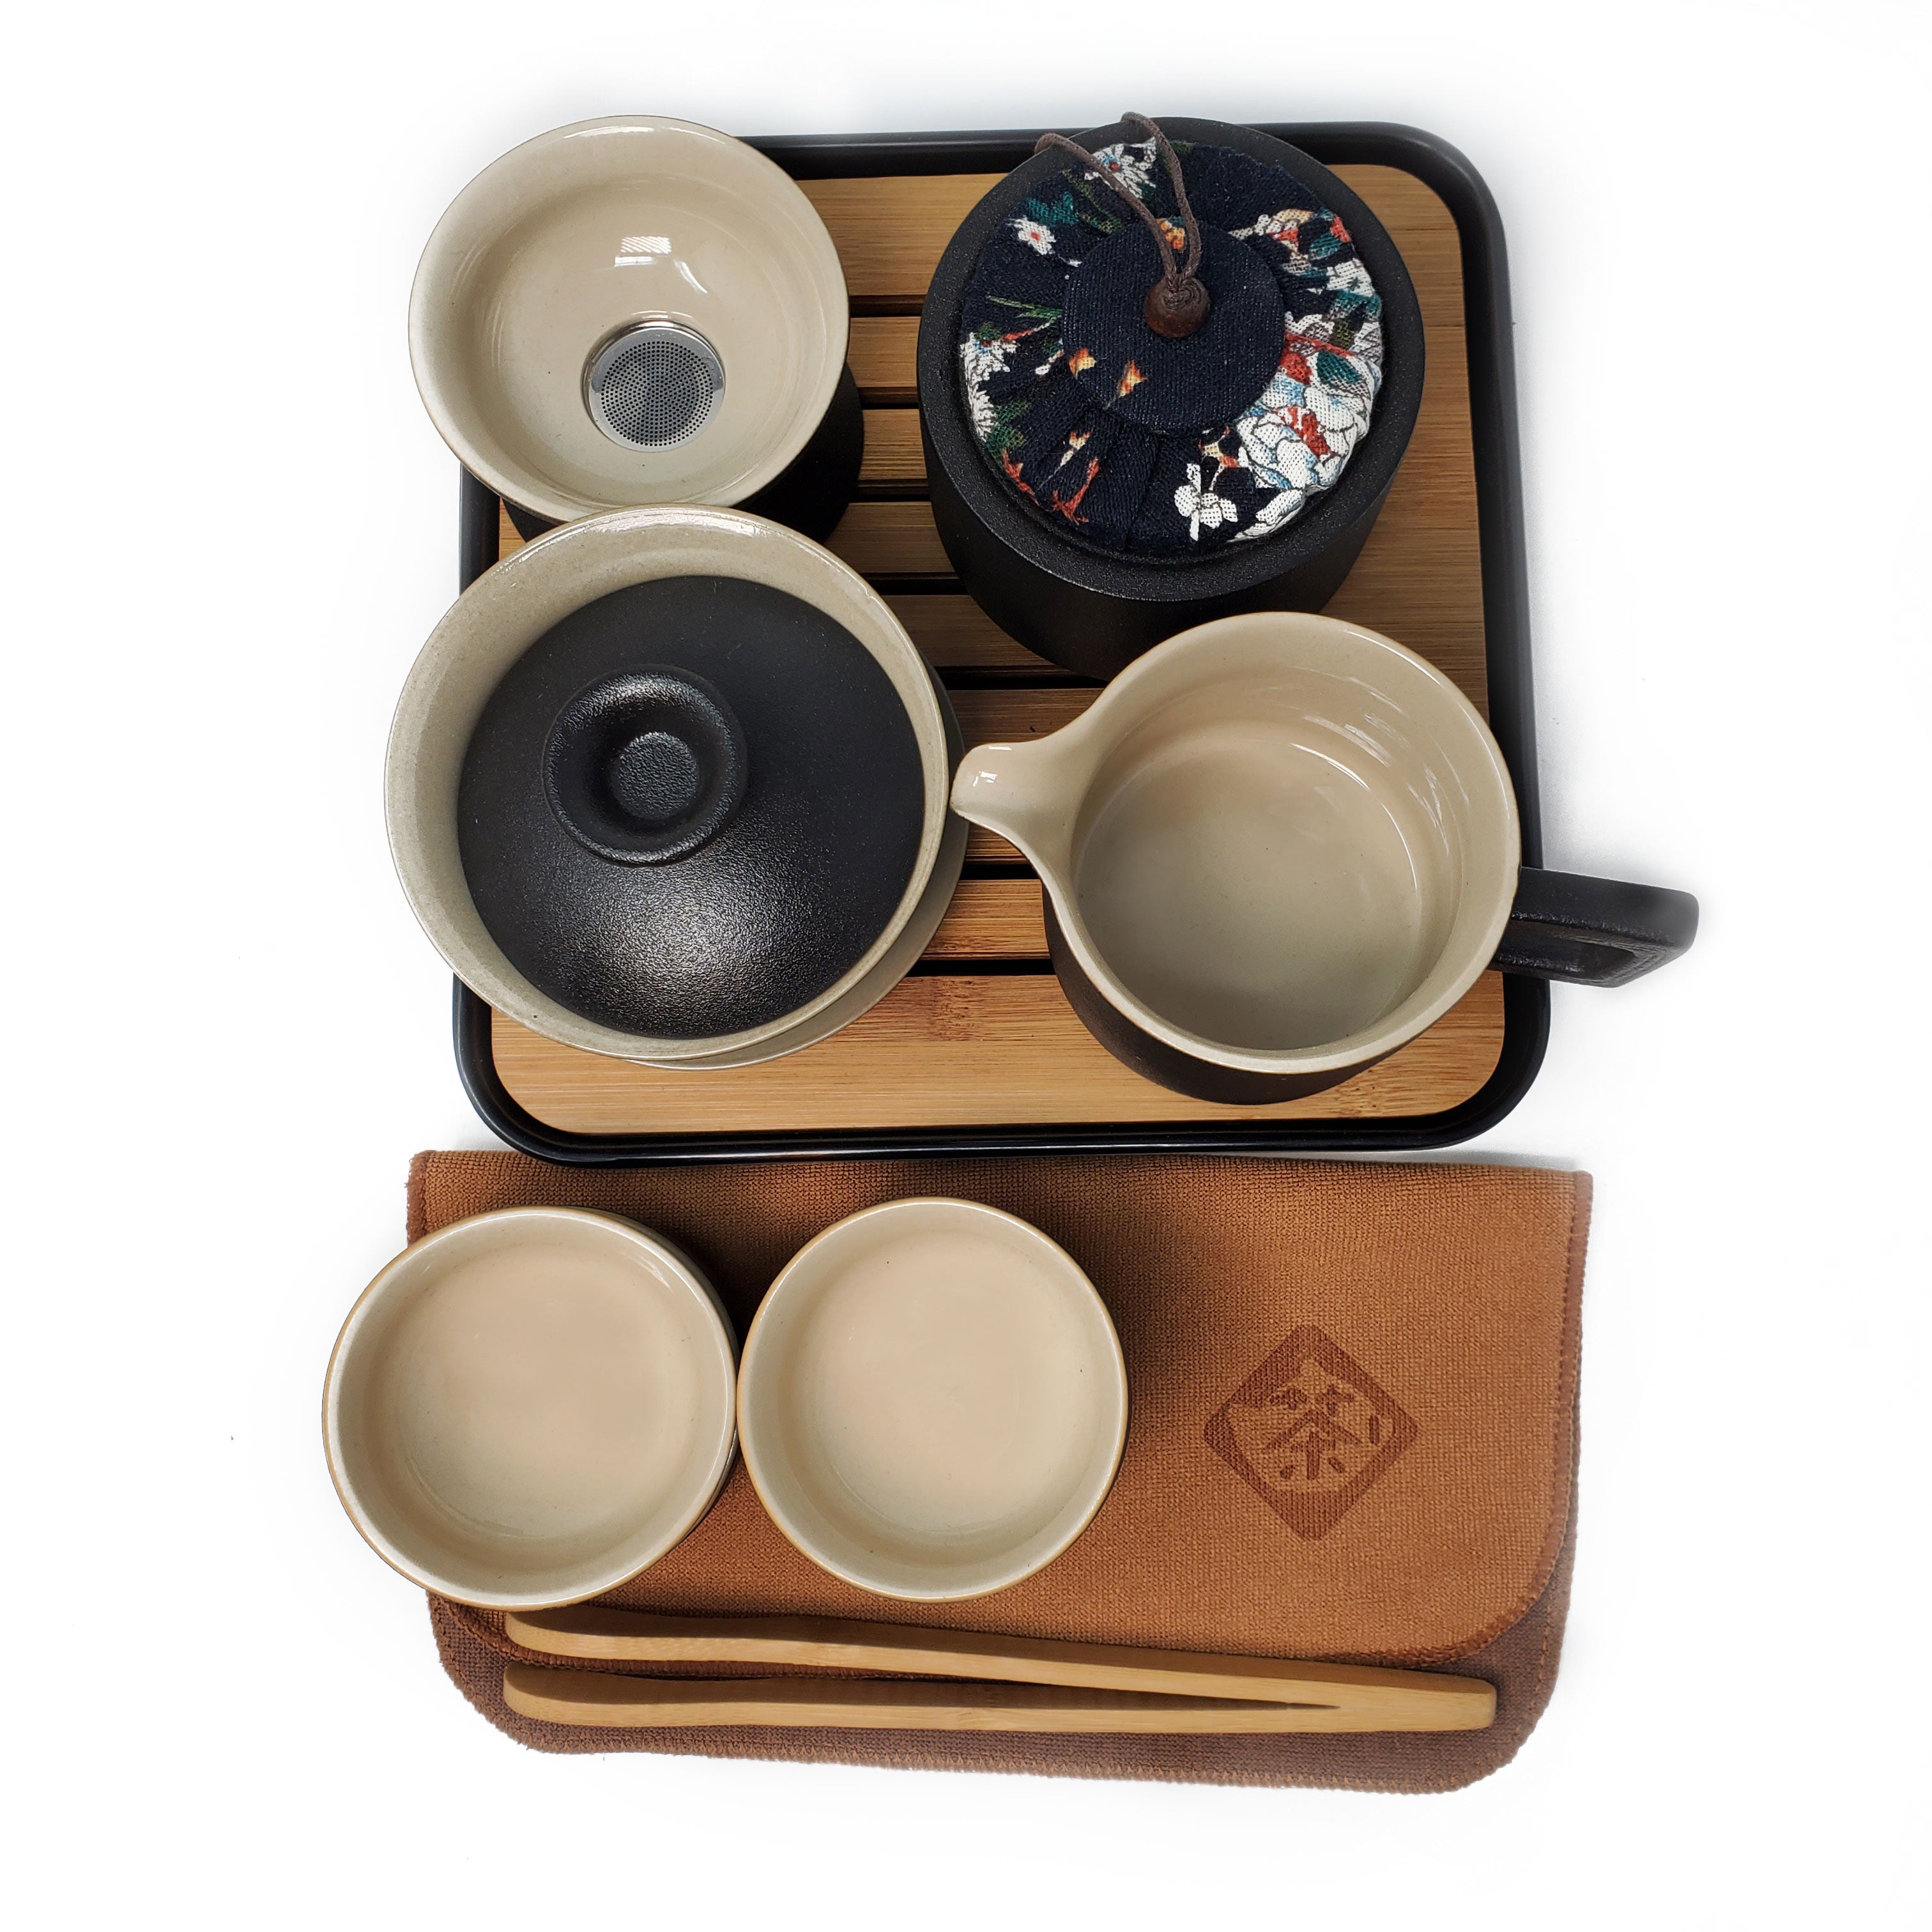 7-Piece Popular Chinese Travel Tea Set for Gongfu Cha 